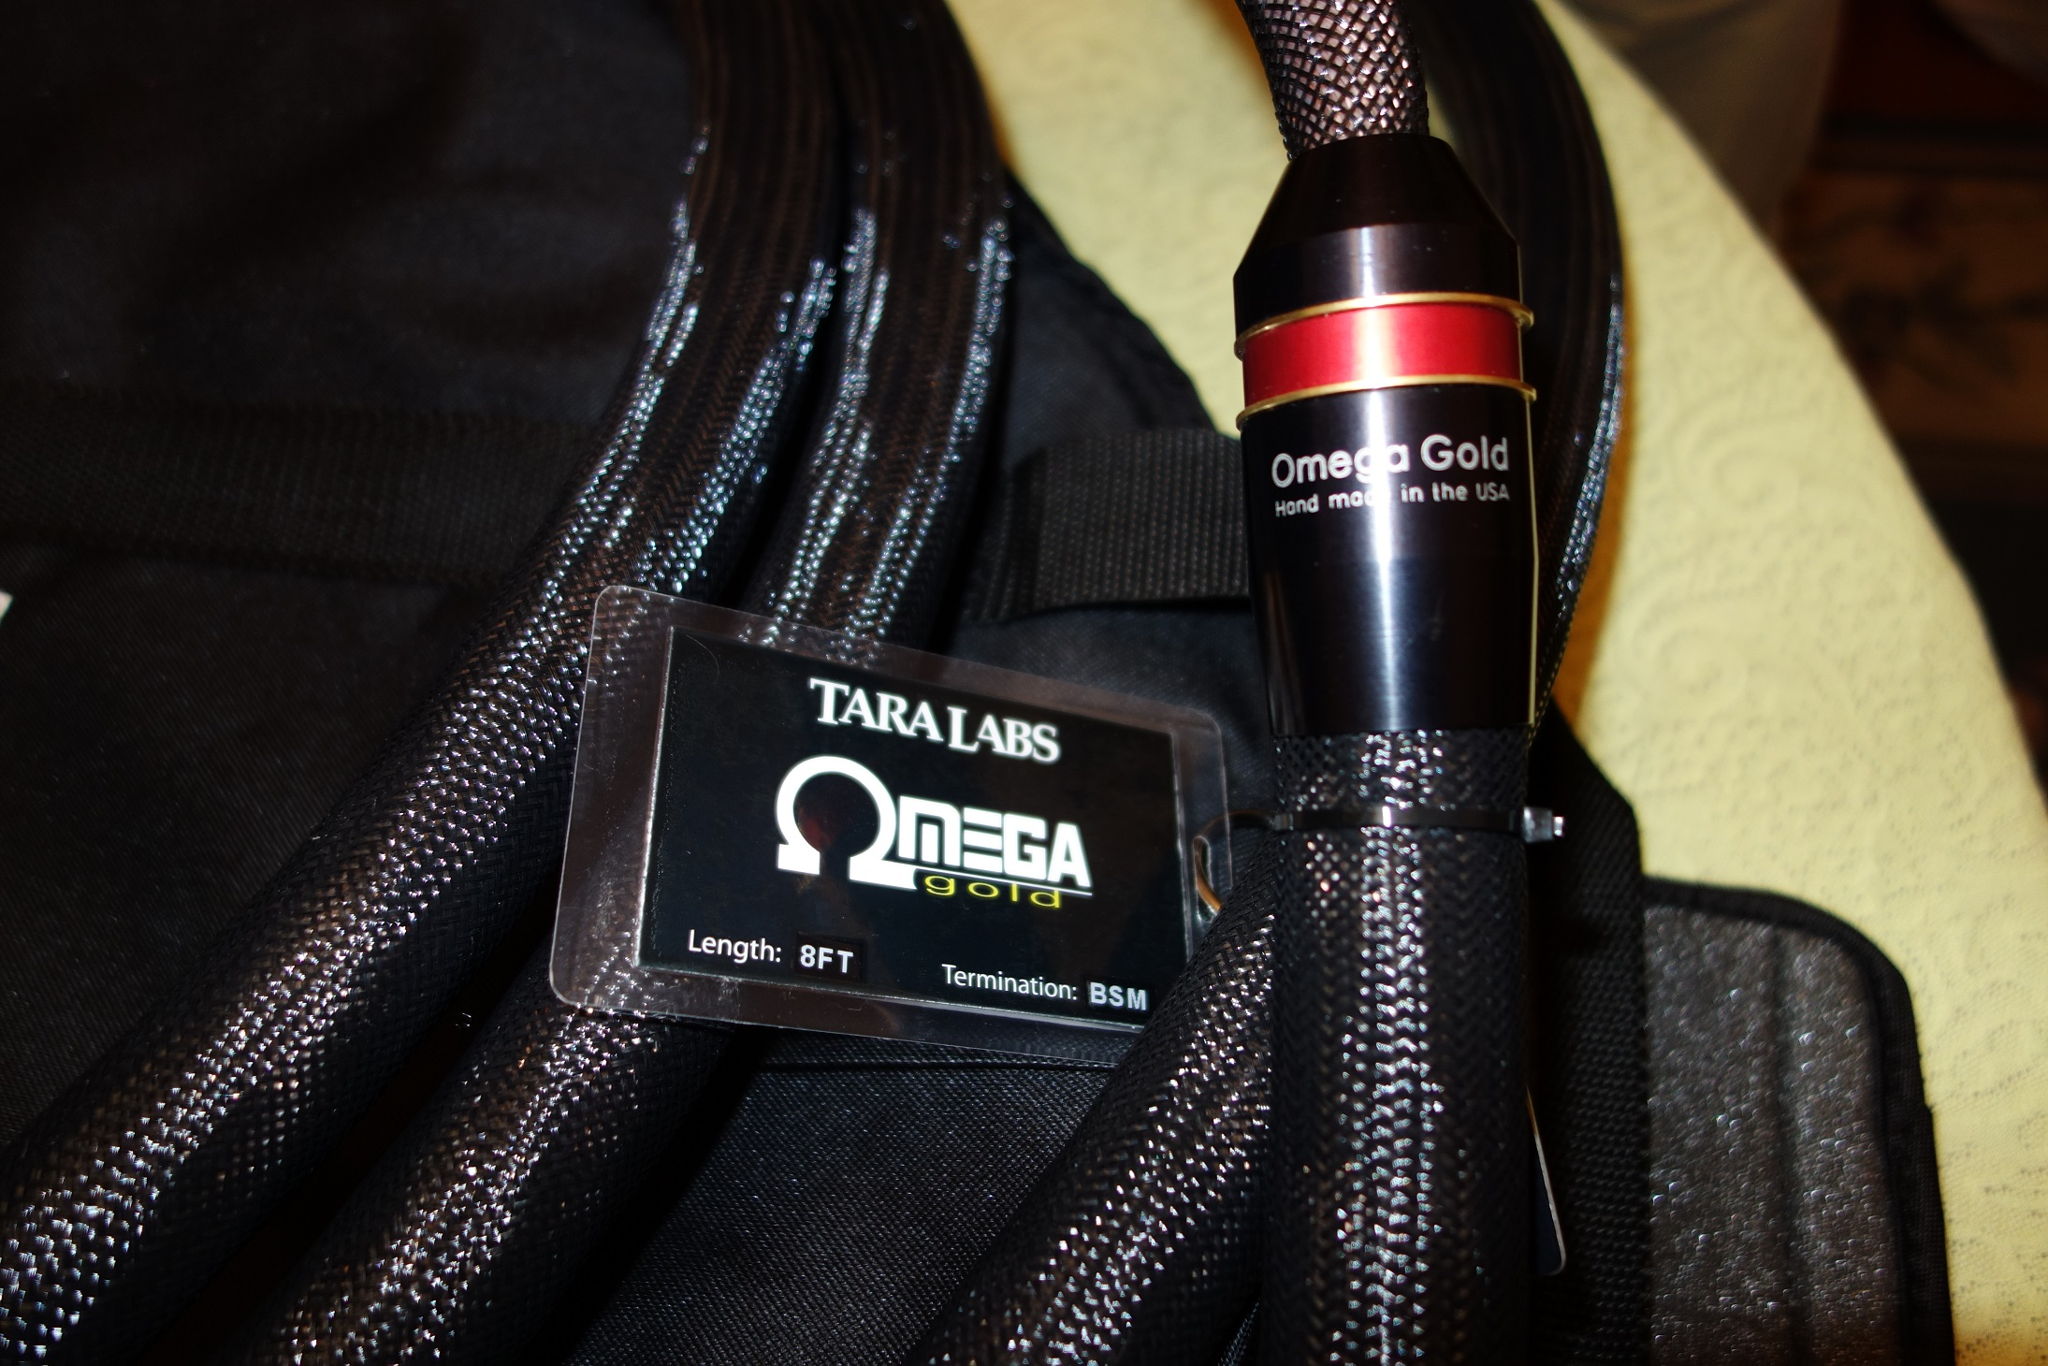 Tara Labs Extreme Series Omega Gold 8ft Speaker Cables 2